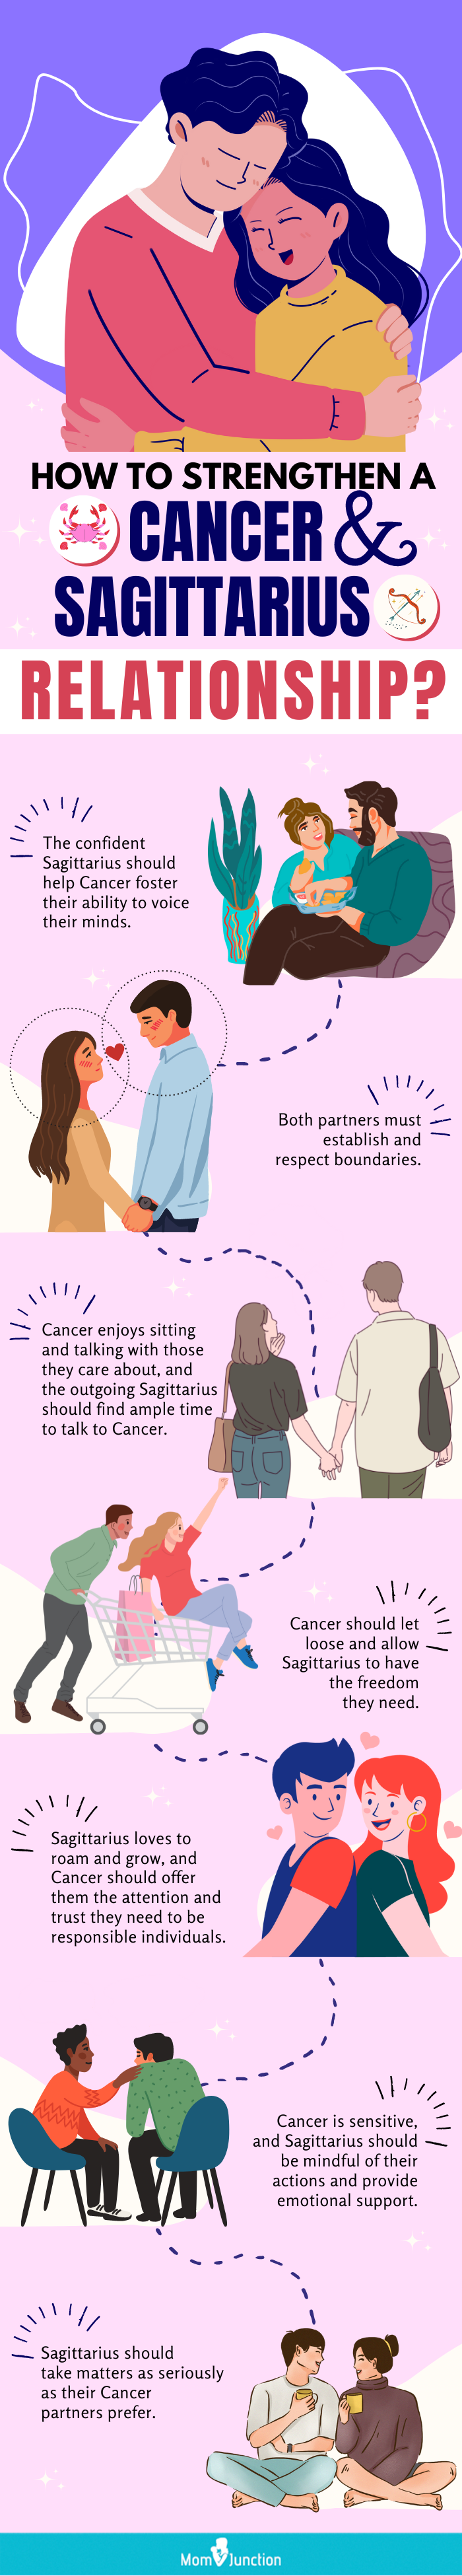 how to strengthen a cancer and sagittarius relationship (infographic)